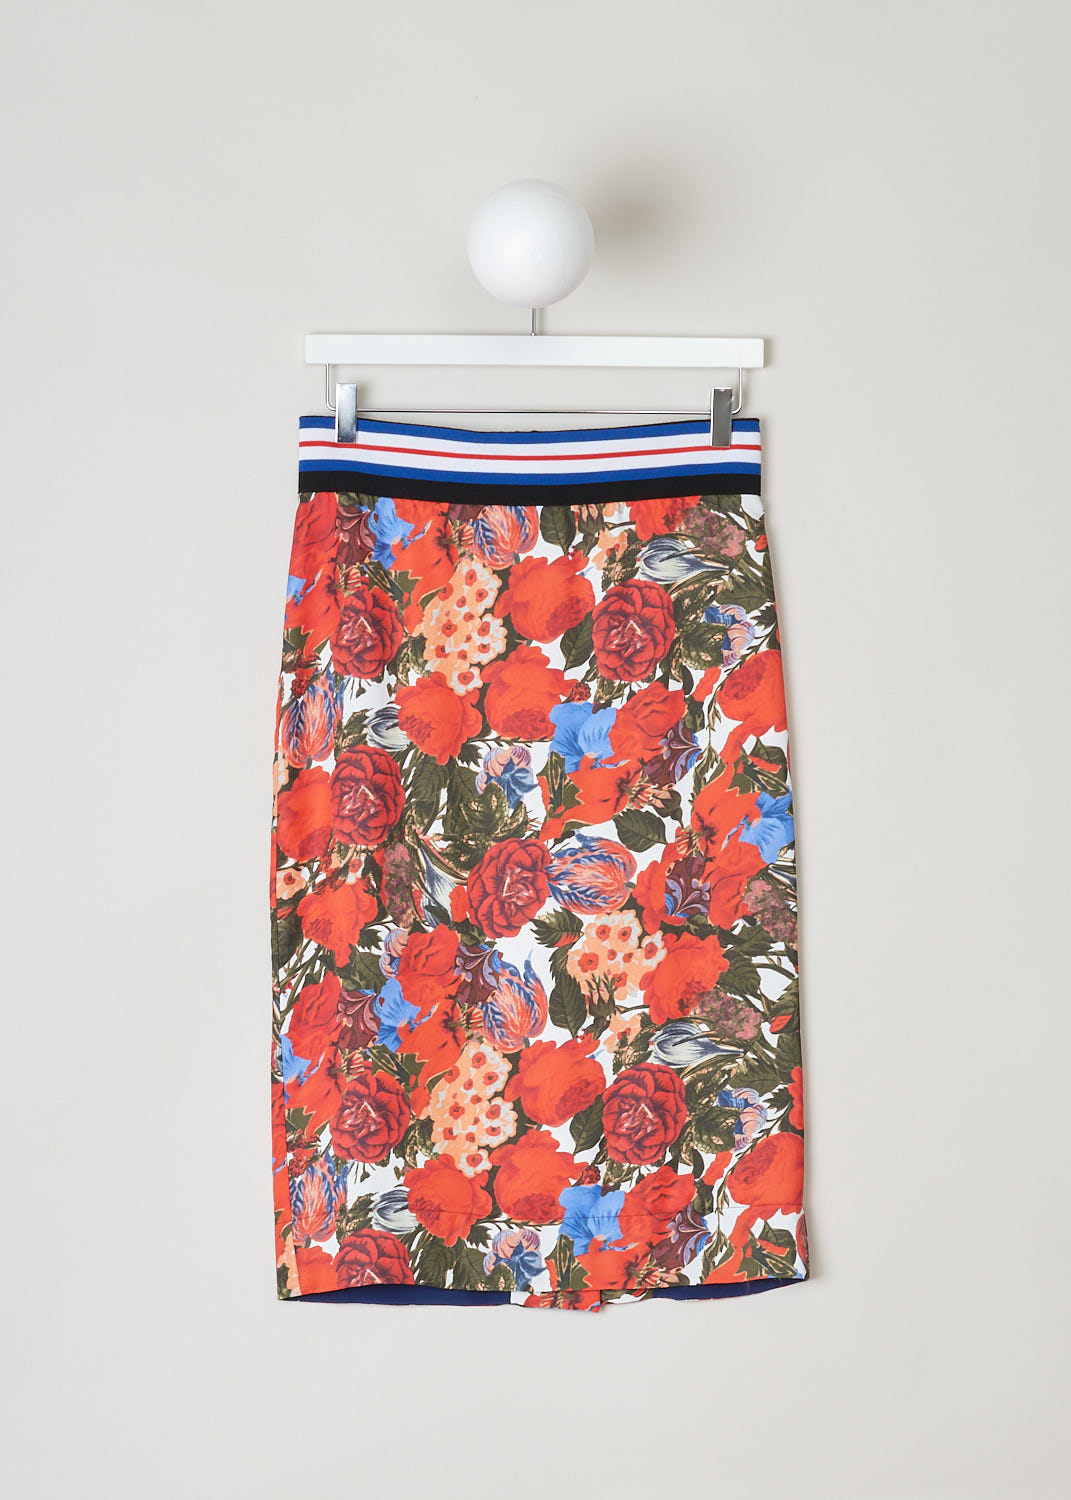 MARNI, PENCIL SKIRT ADORNED WITH A RED FLORAL MOTIF, GOMAP26LO0_TV677_DUR66, Red, Print, Front, This pencil skirt comes decorated with a cheerful floral print in reds and blues. Made with a broad elastic waistband for maximum comfort. The fastening option here comes in the form of a concealed zipper and is found on the back. Also found on the back is the split, going up a third of the way. 